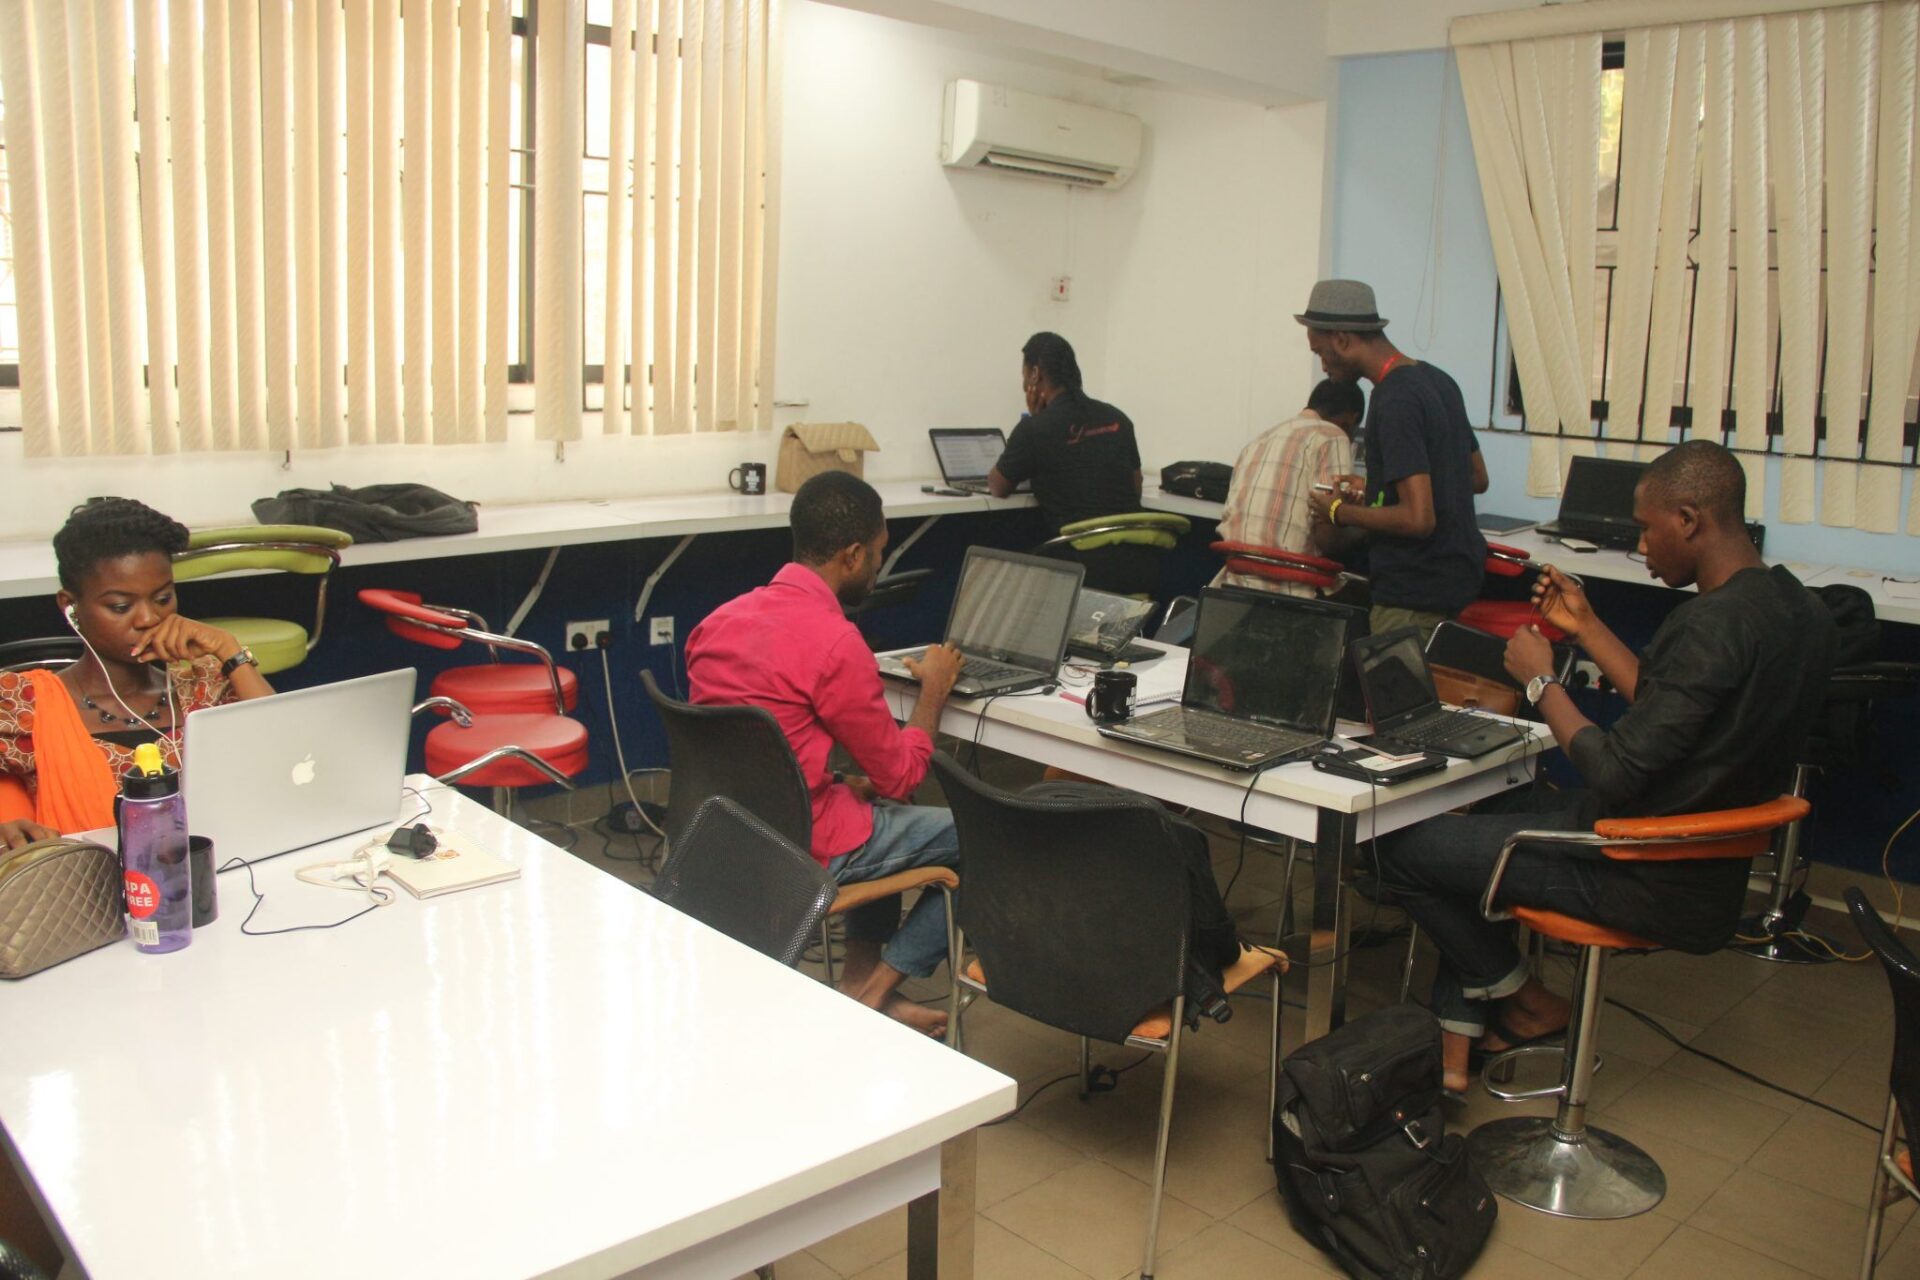 New Internet platform offers ‘one-off jobs’ to Nigerian students